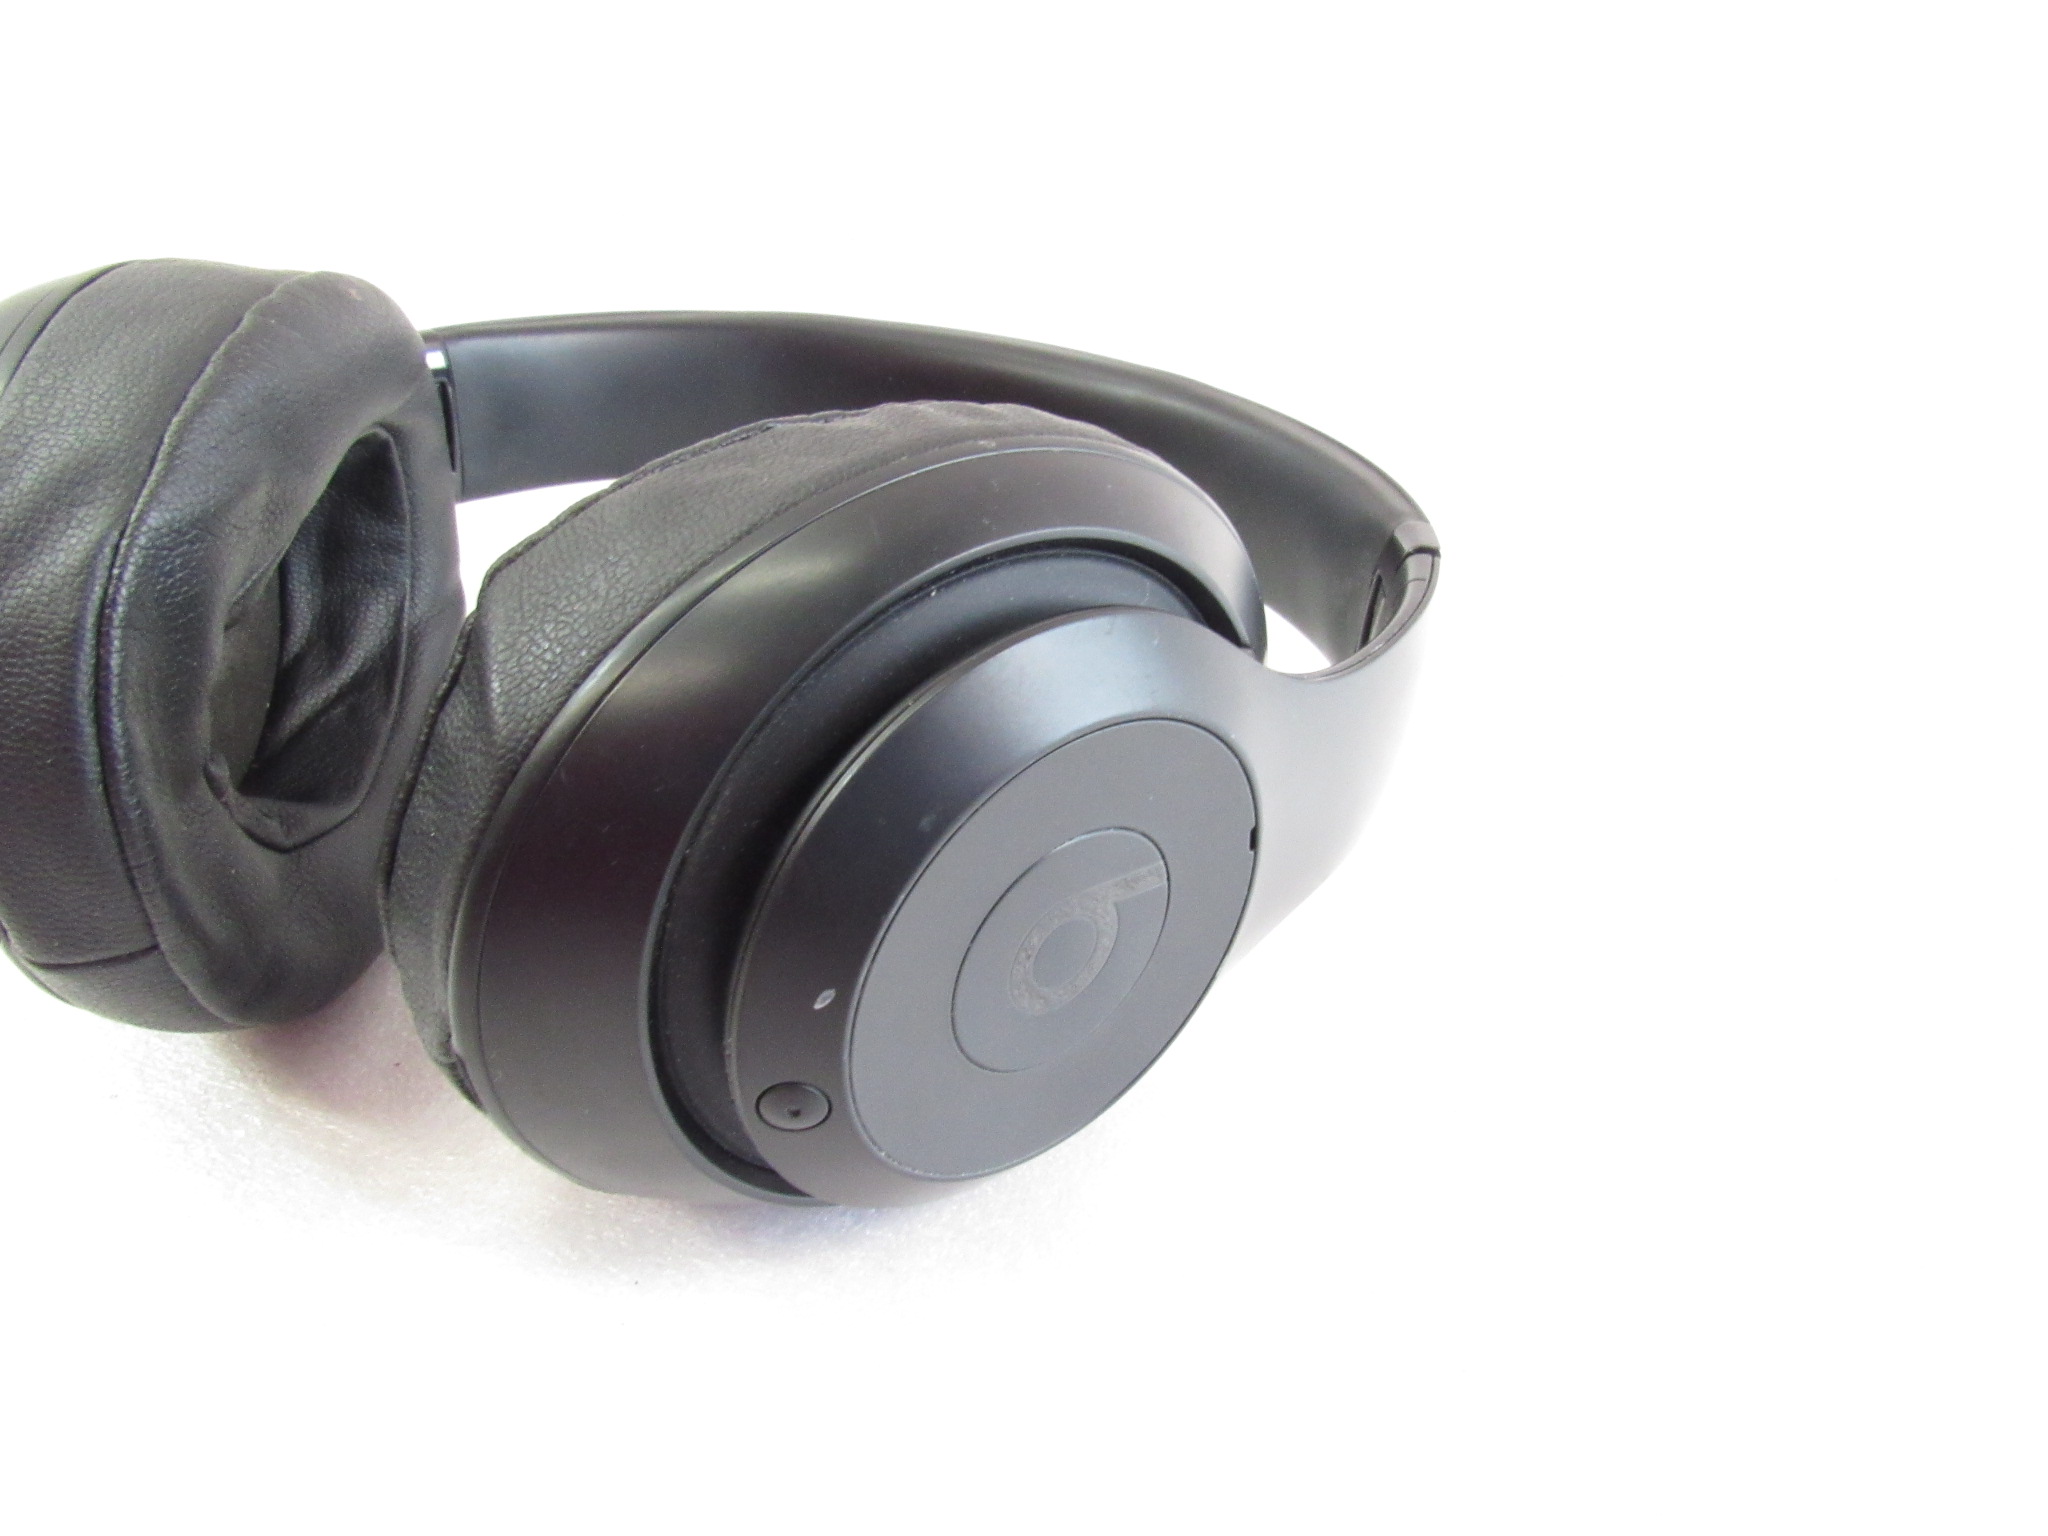 Beats by Dr. Dre Studio3 Wireless Portable Bluetooth Noise